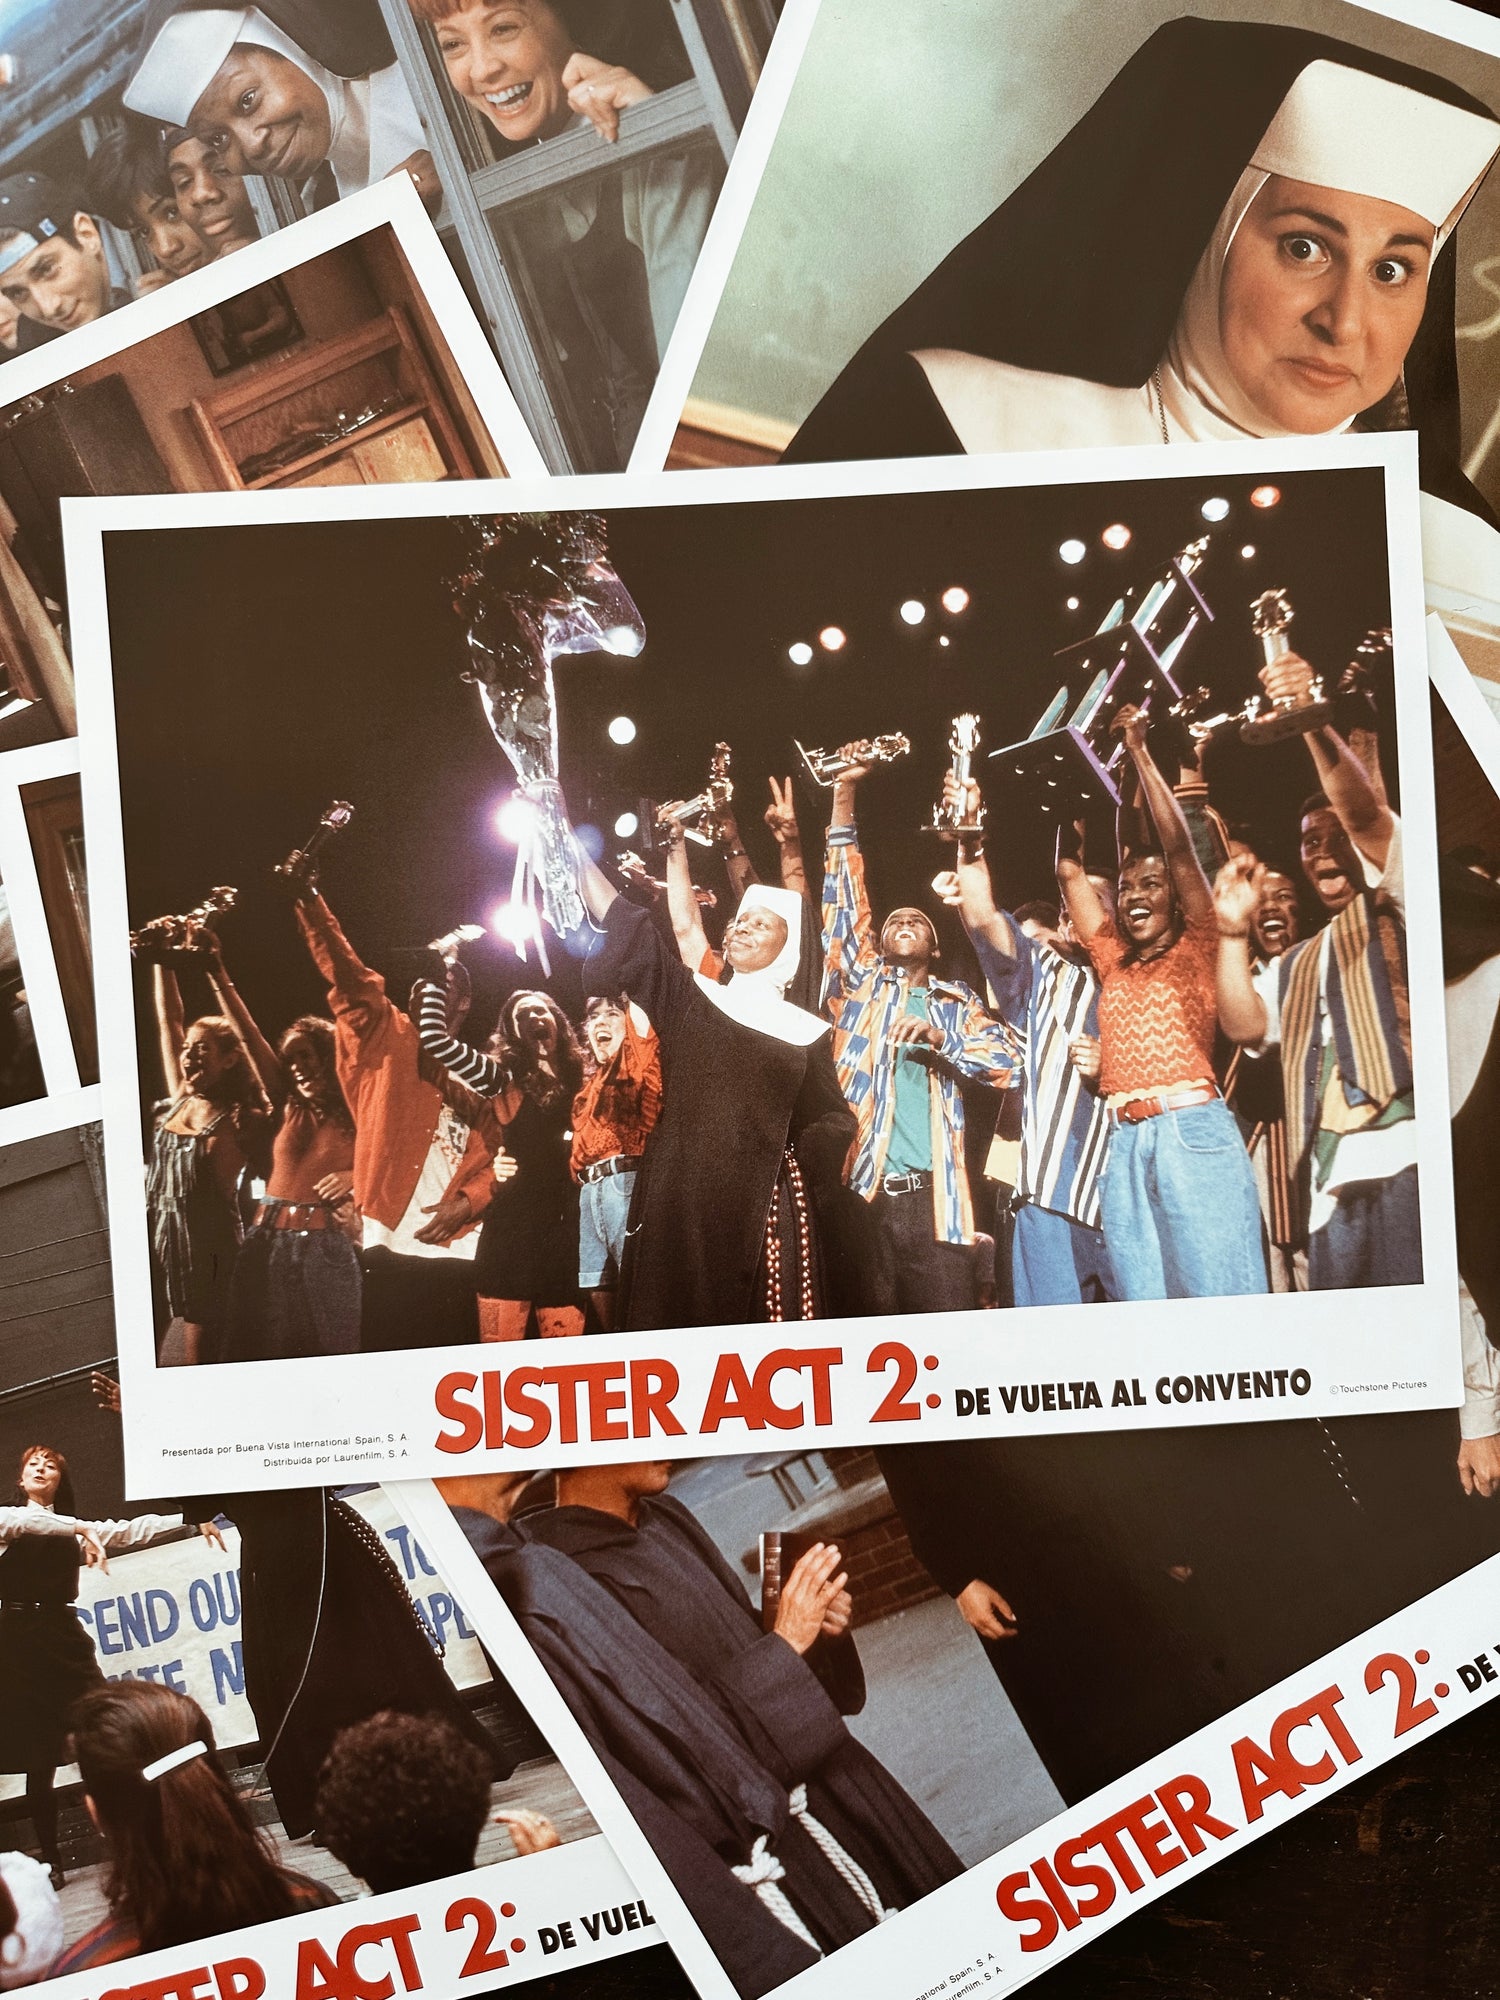 Vintage “Sister Act 2” Lobby Card Posters (Spanish, 1993)